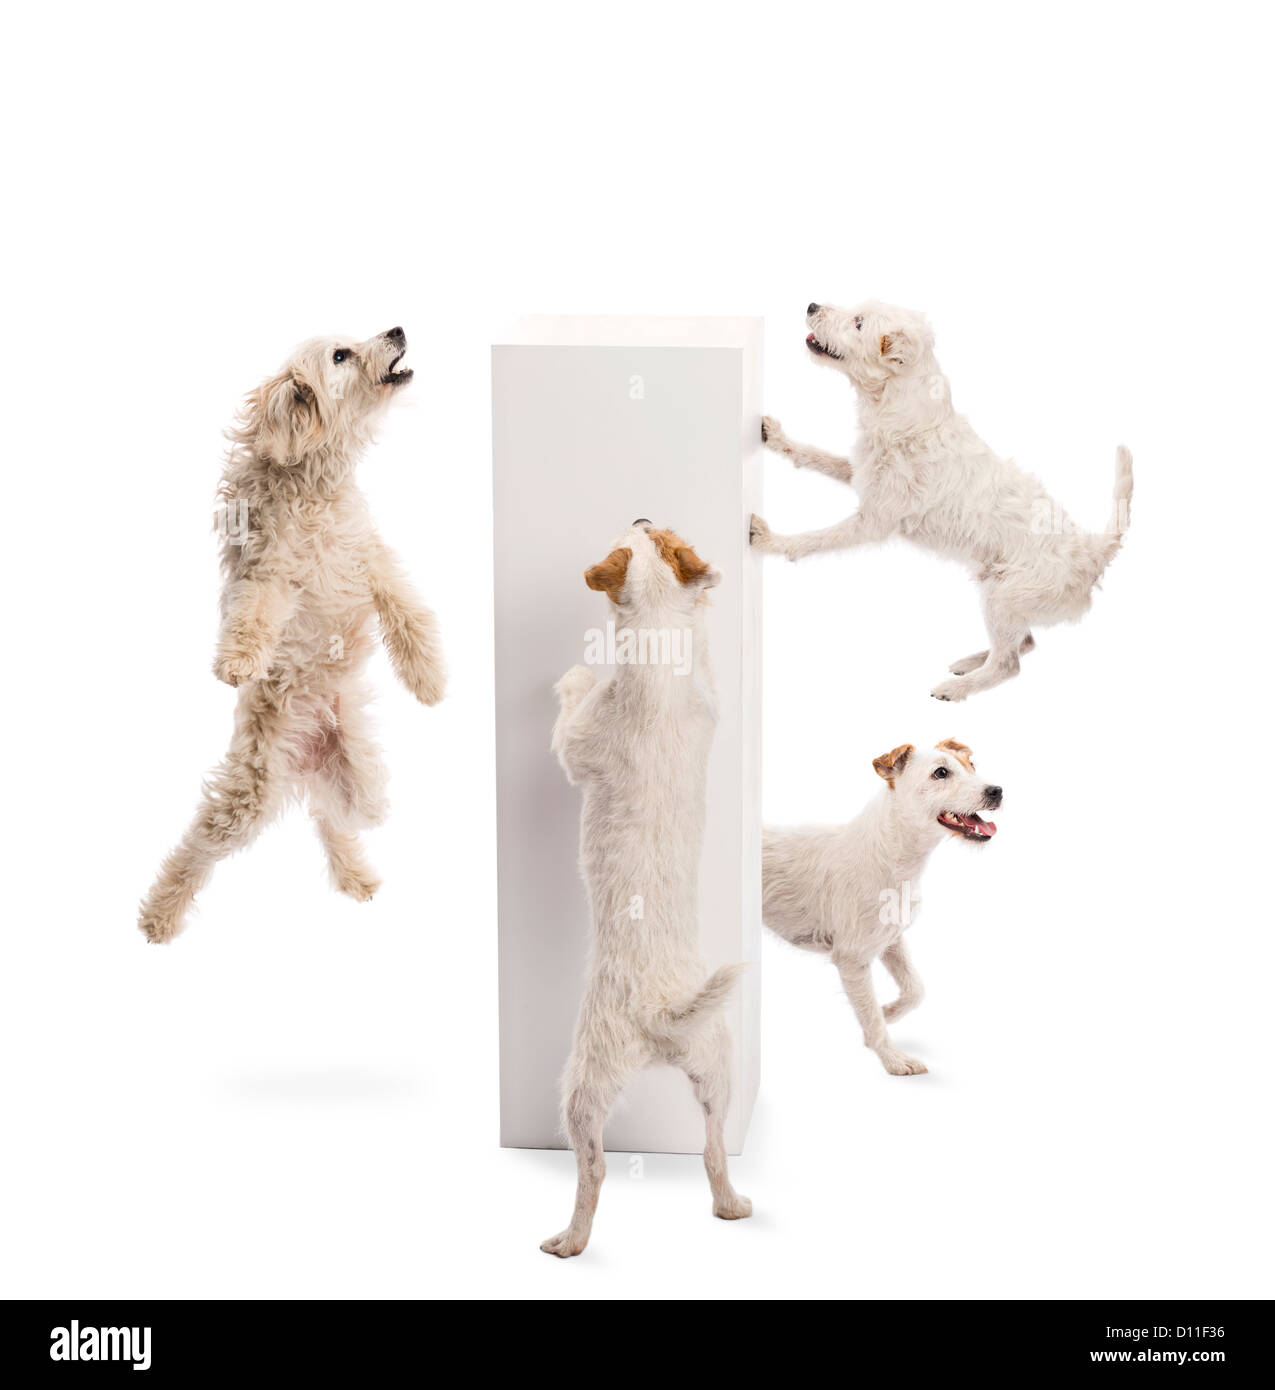 Dogs jumping and looking at pedestal against white background Stock Photo